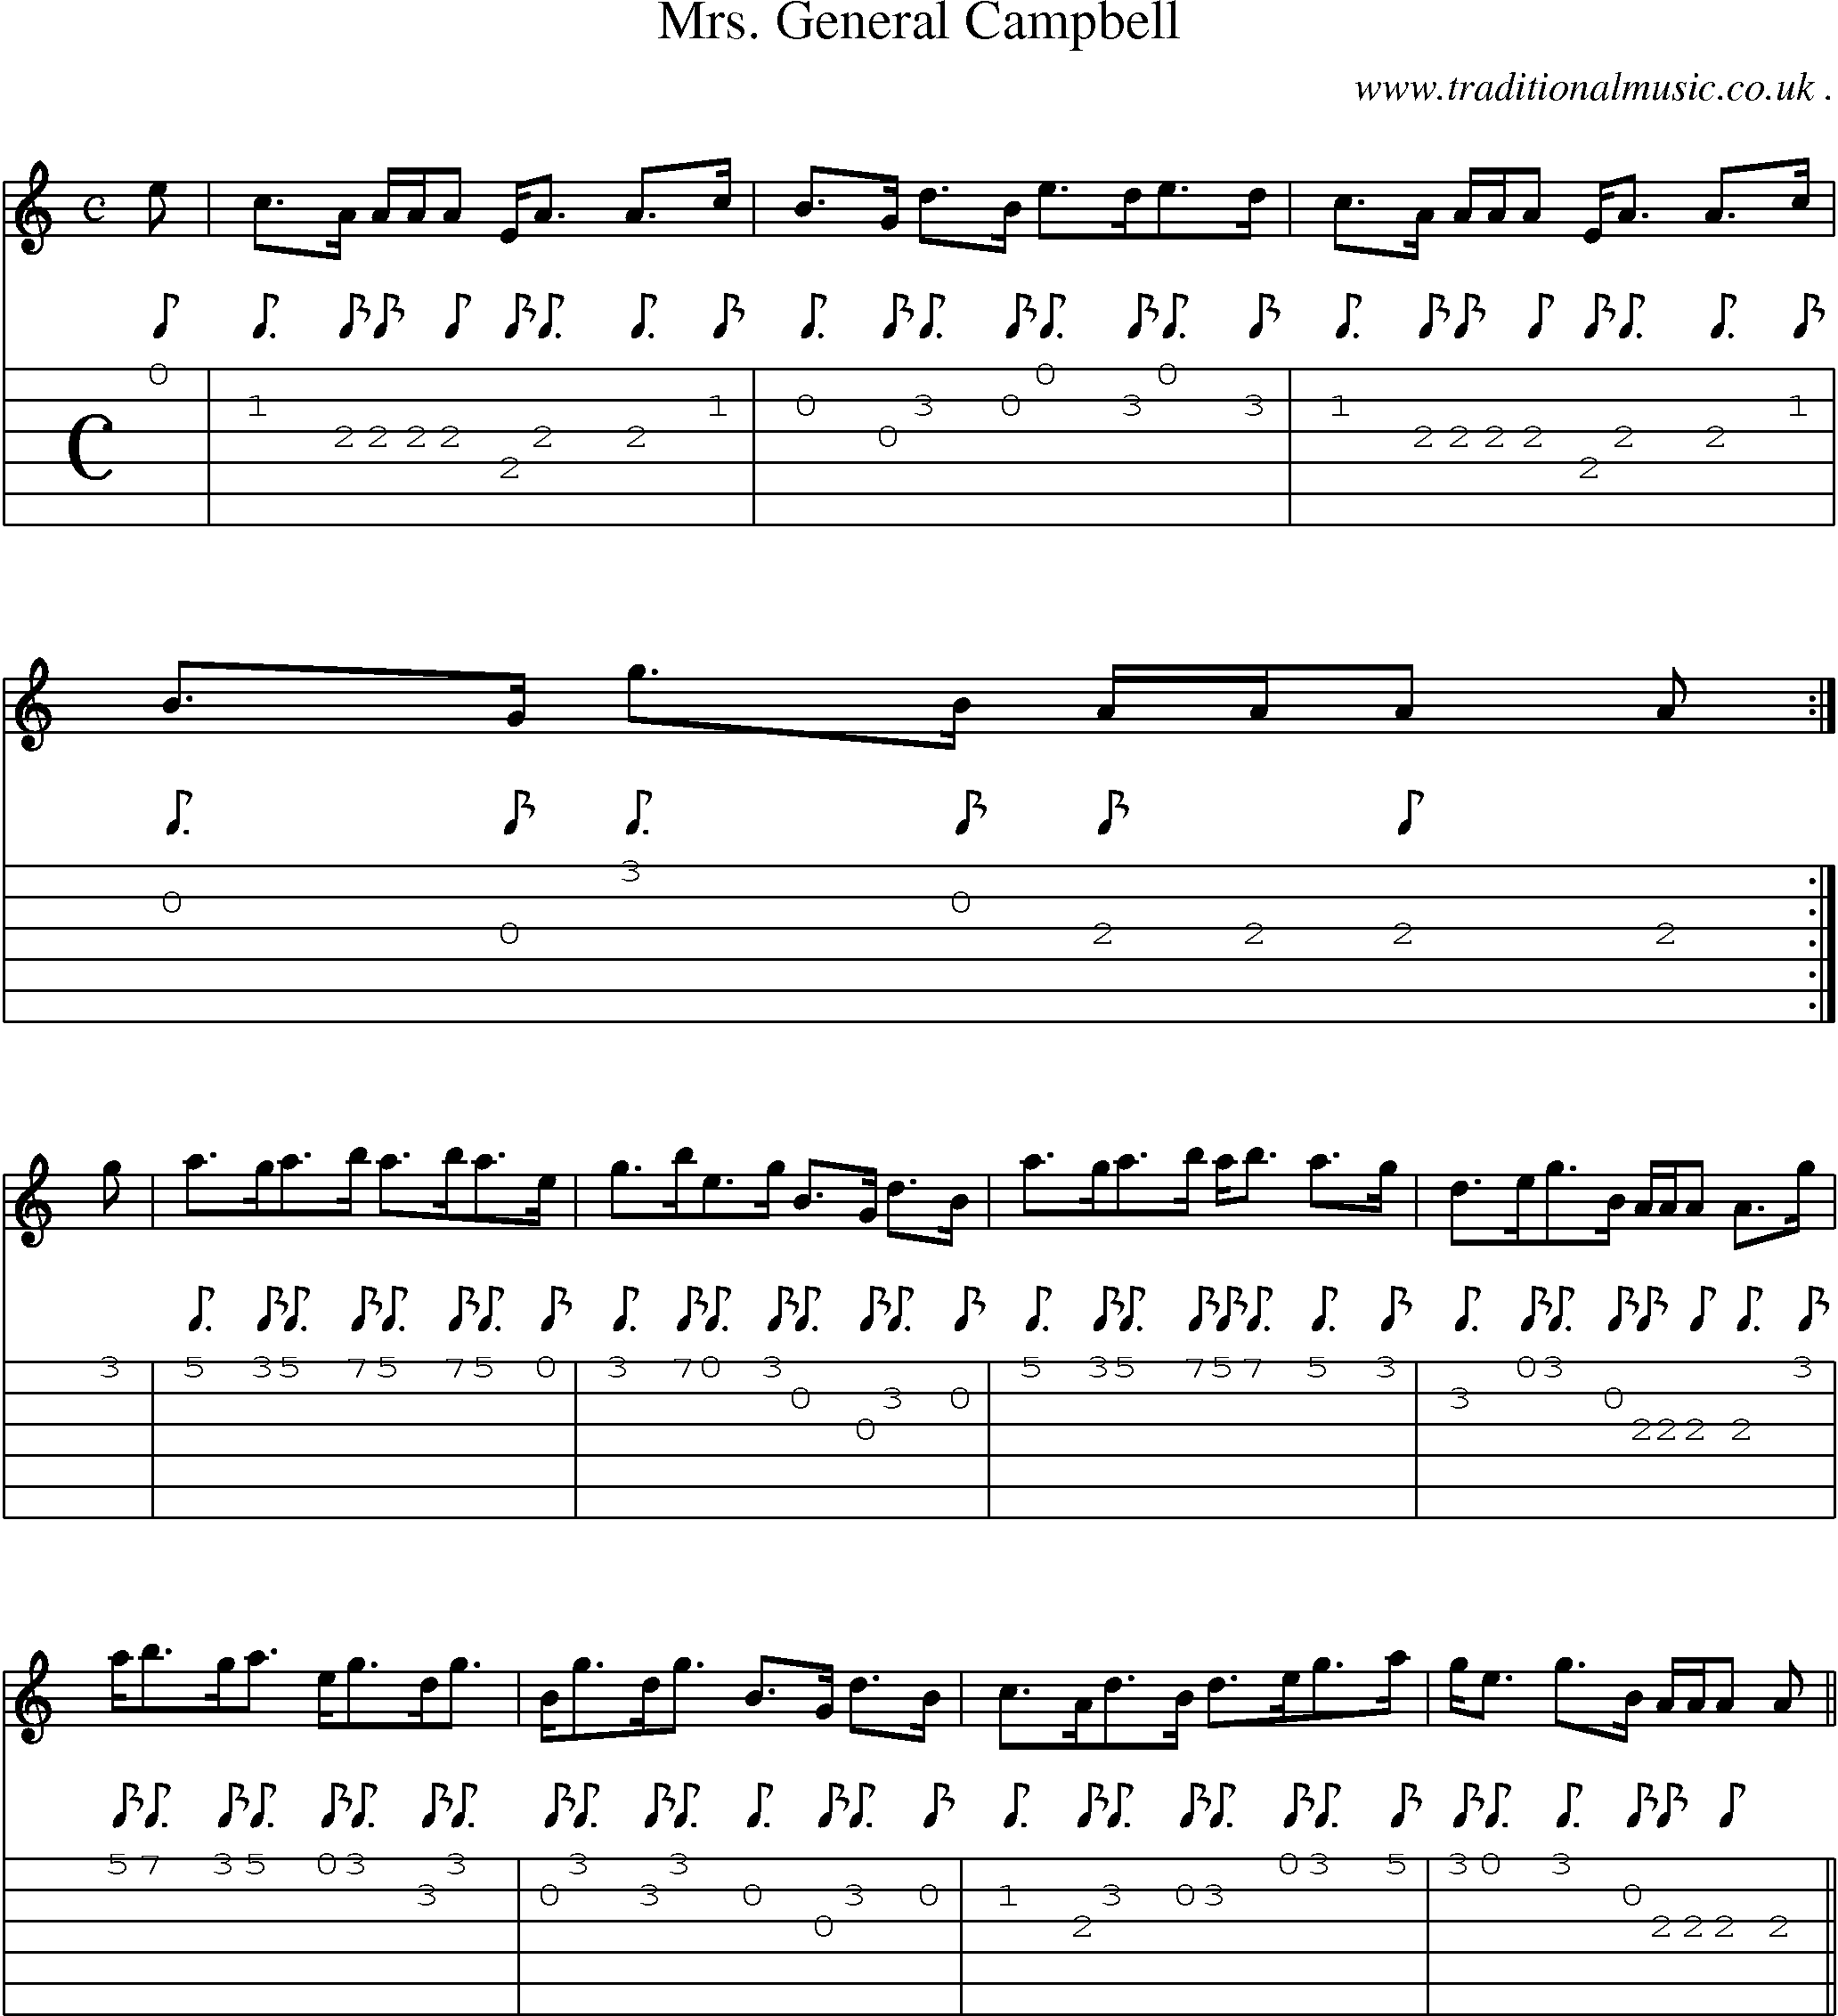 Sheet-music  score, Chords and Guitar Tabs for Mrs General Campbell